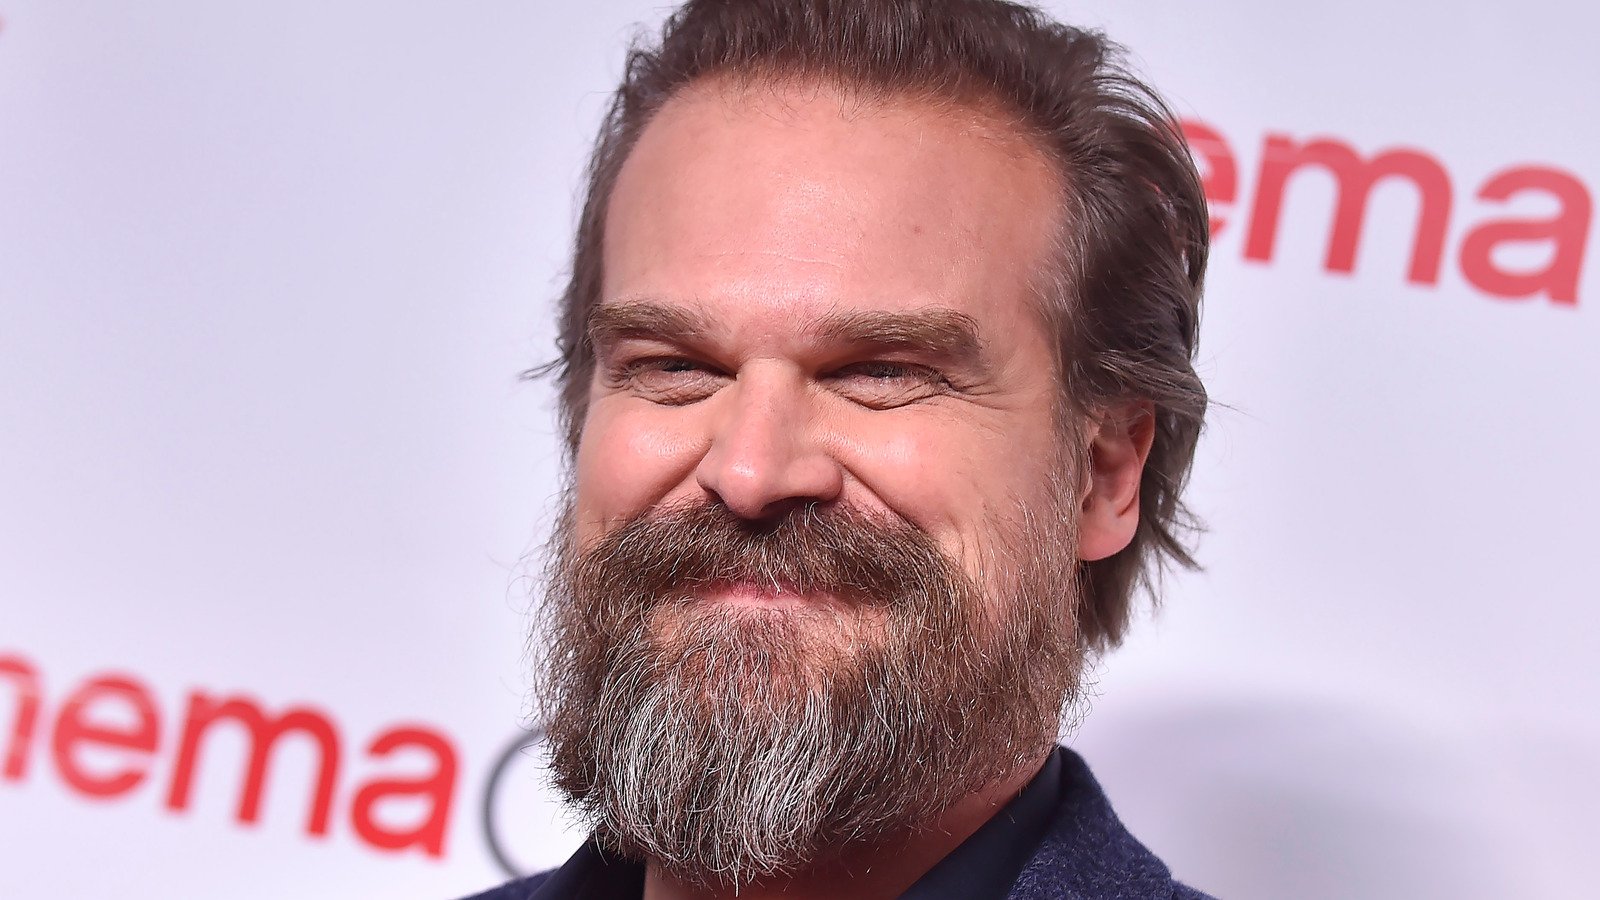 David Harbour talks about his relationship